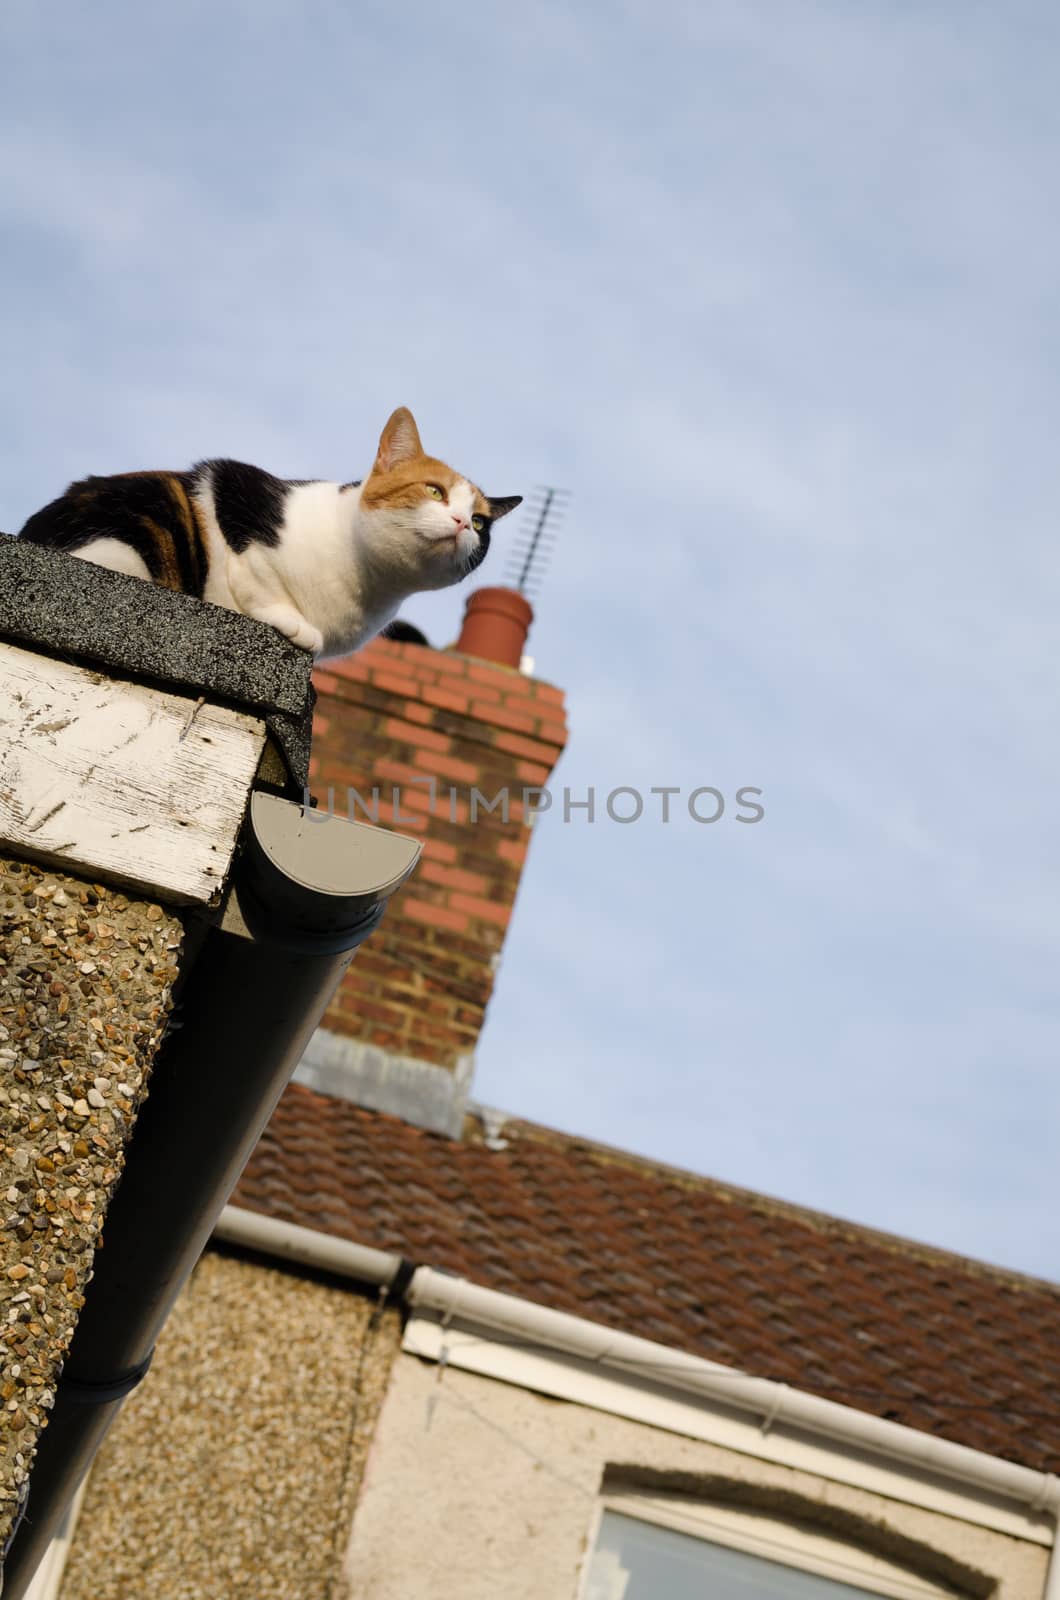 Beautiful cat on the roof with the chimney behind her, England, UK